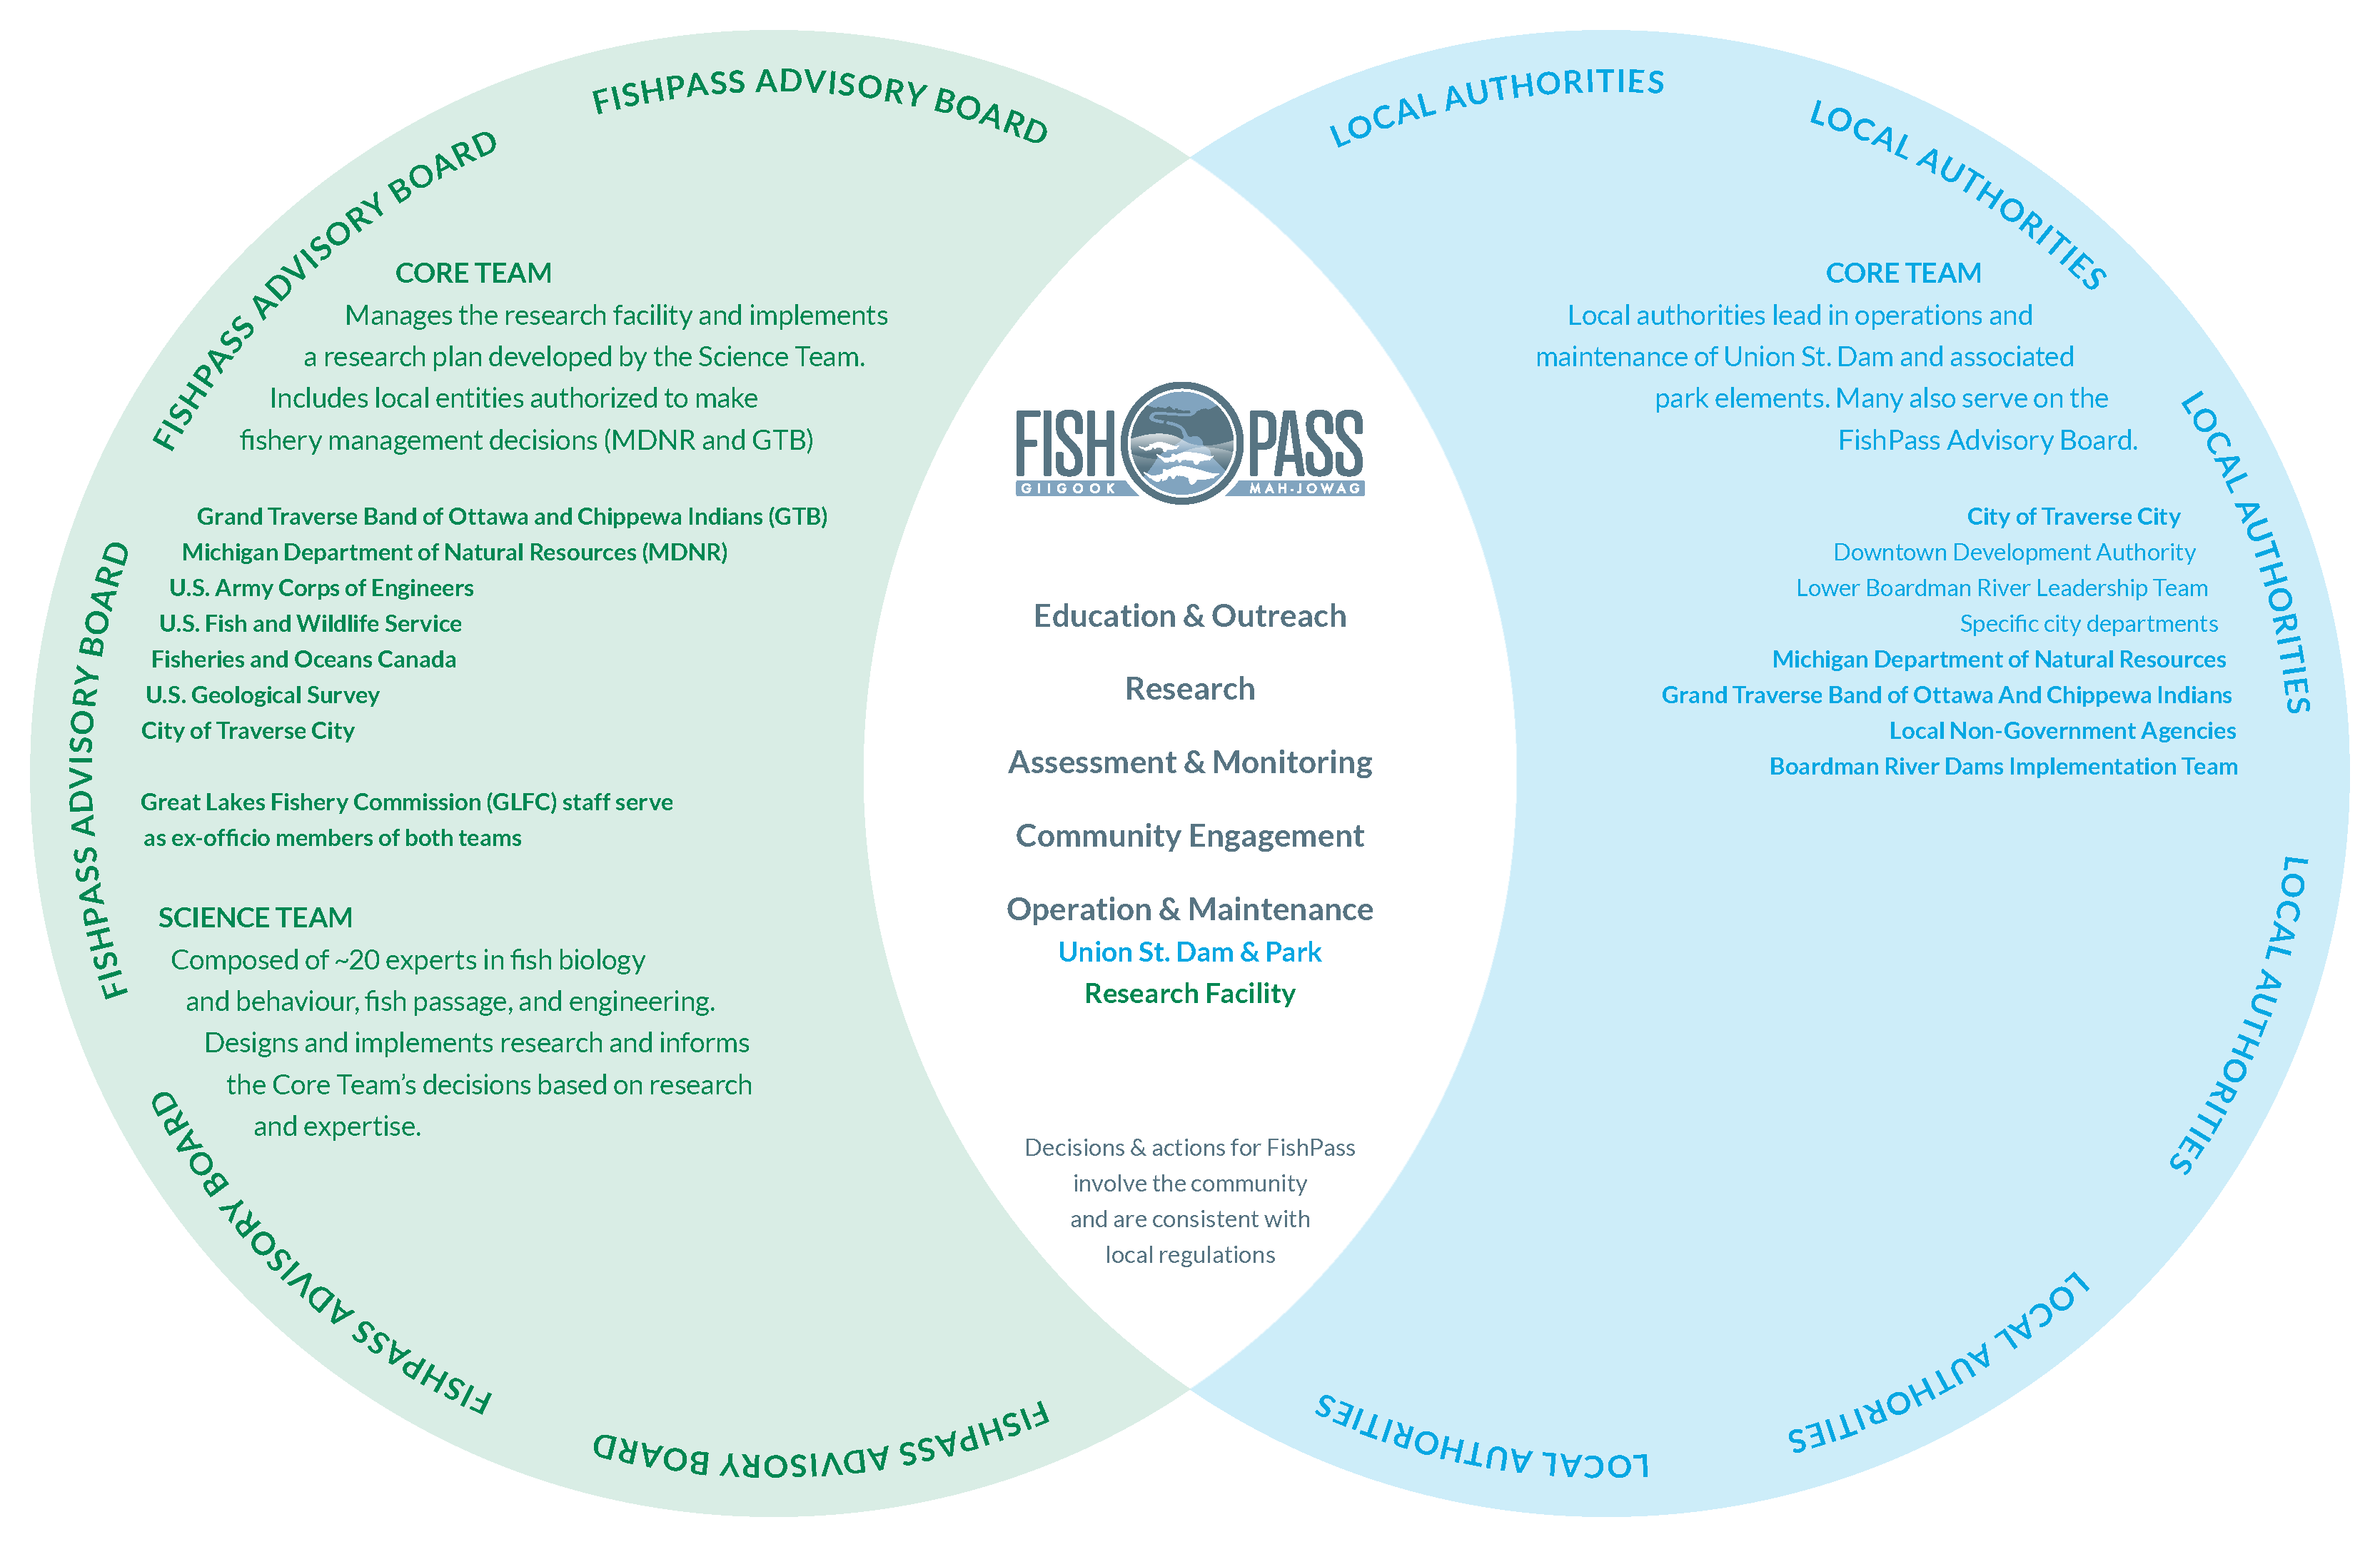 Venn diagram showking education and outreach, research, assessment and monitoring, community engagement, operation and maintenance, union st. dam and park and research facility in the center